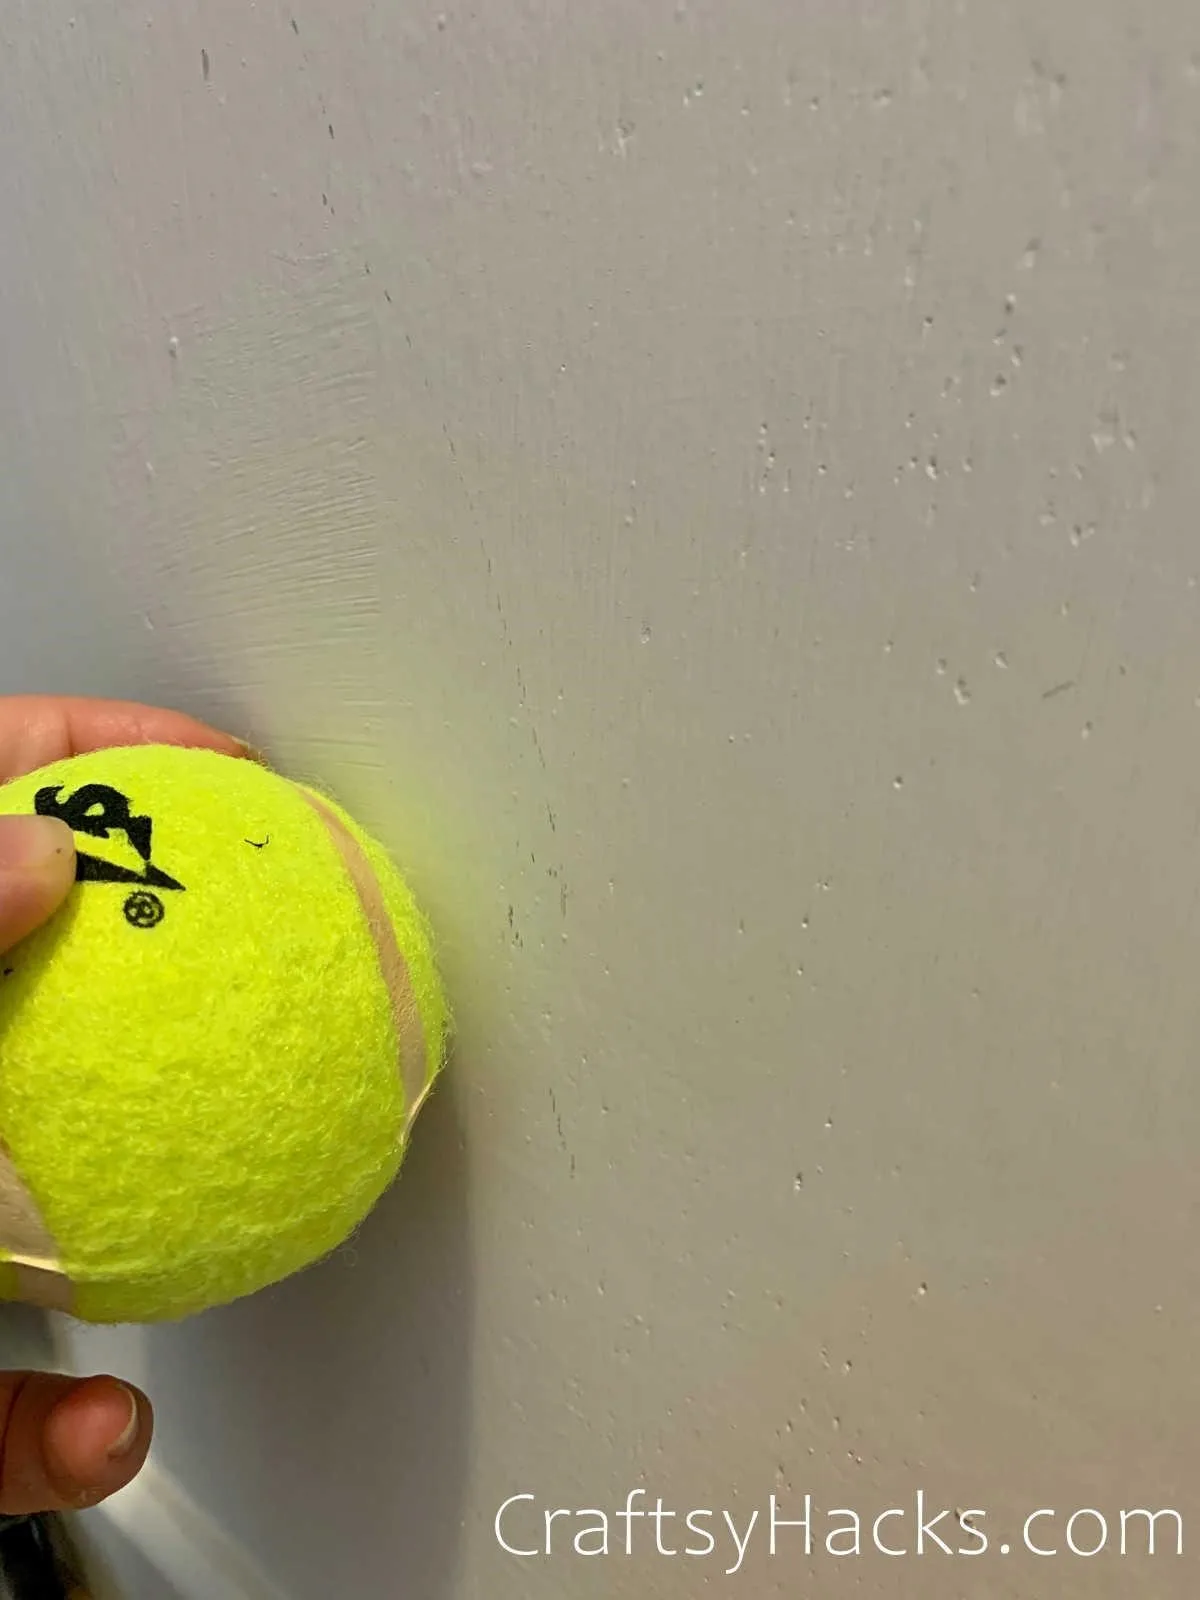 remove scuff marks on the wall with a tennis ball